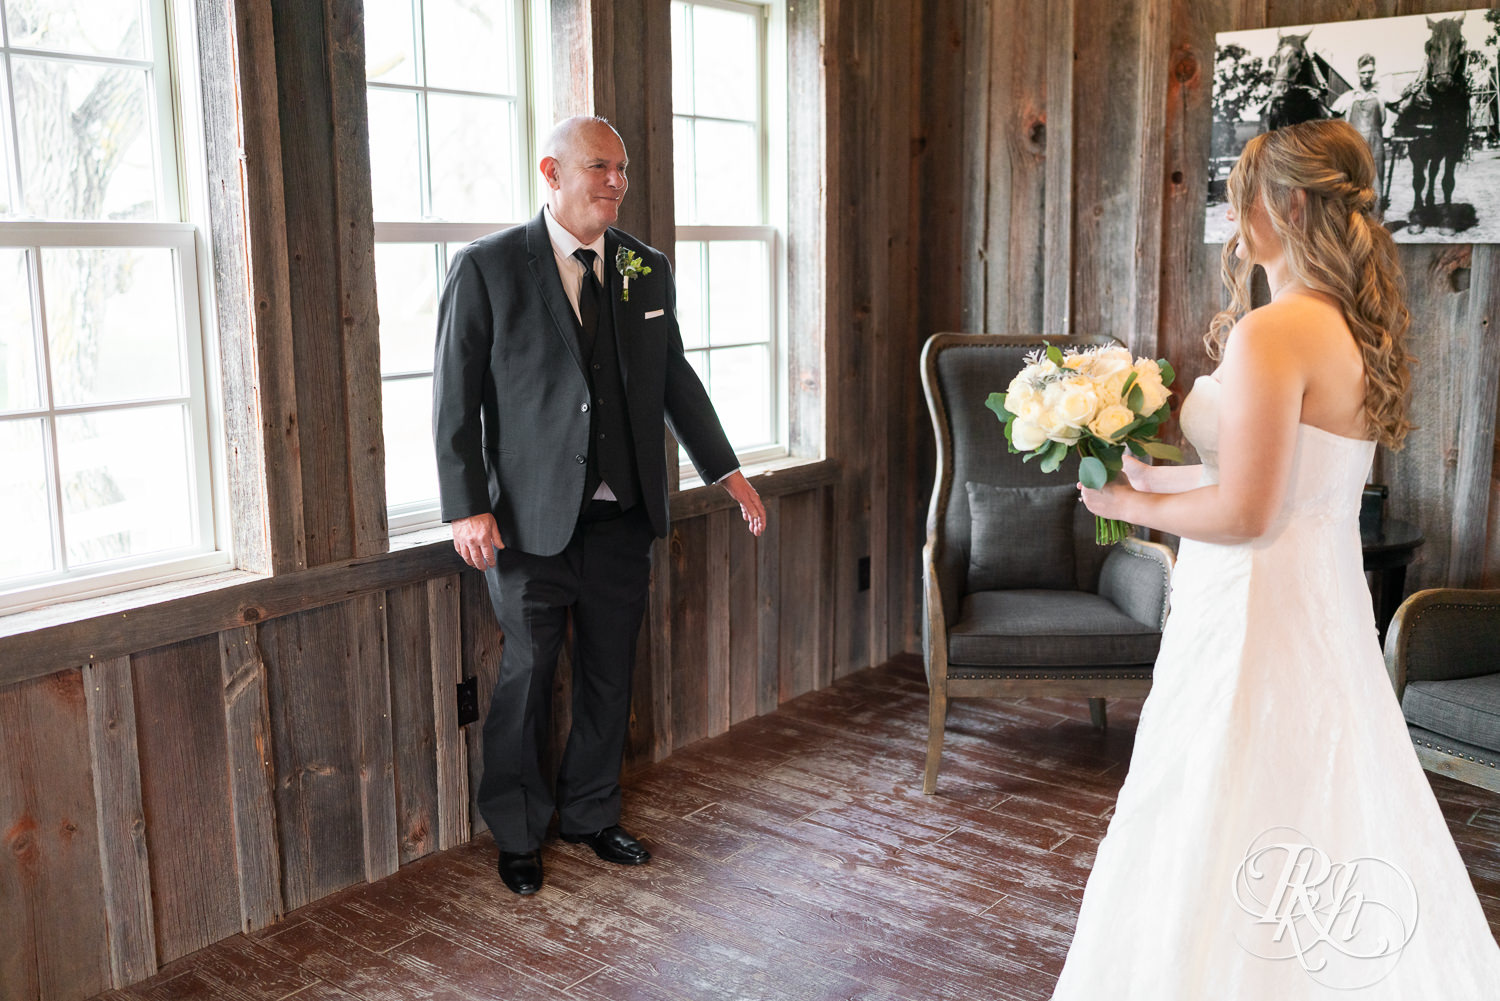 Bride does first look with her dad on wedding day at Almquist Farm in Hastings, Minnesota.